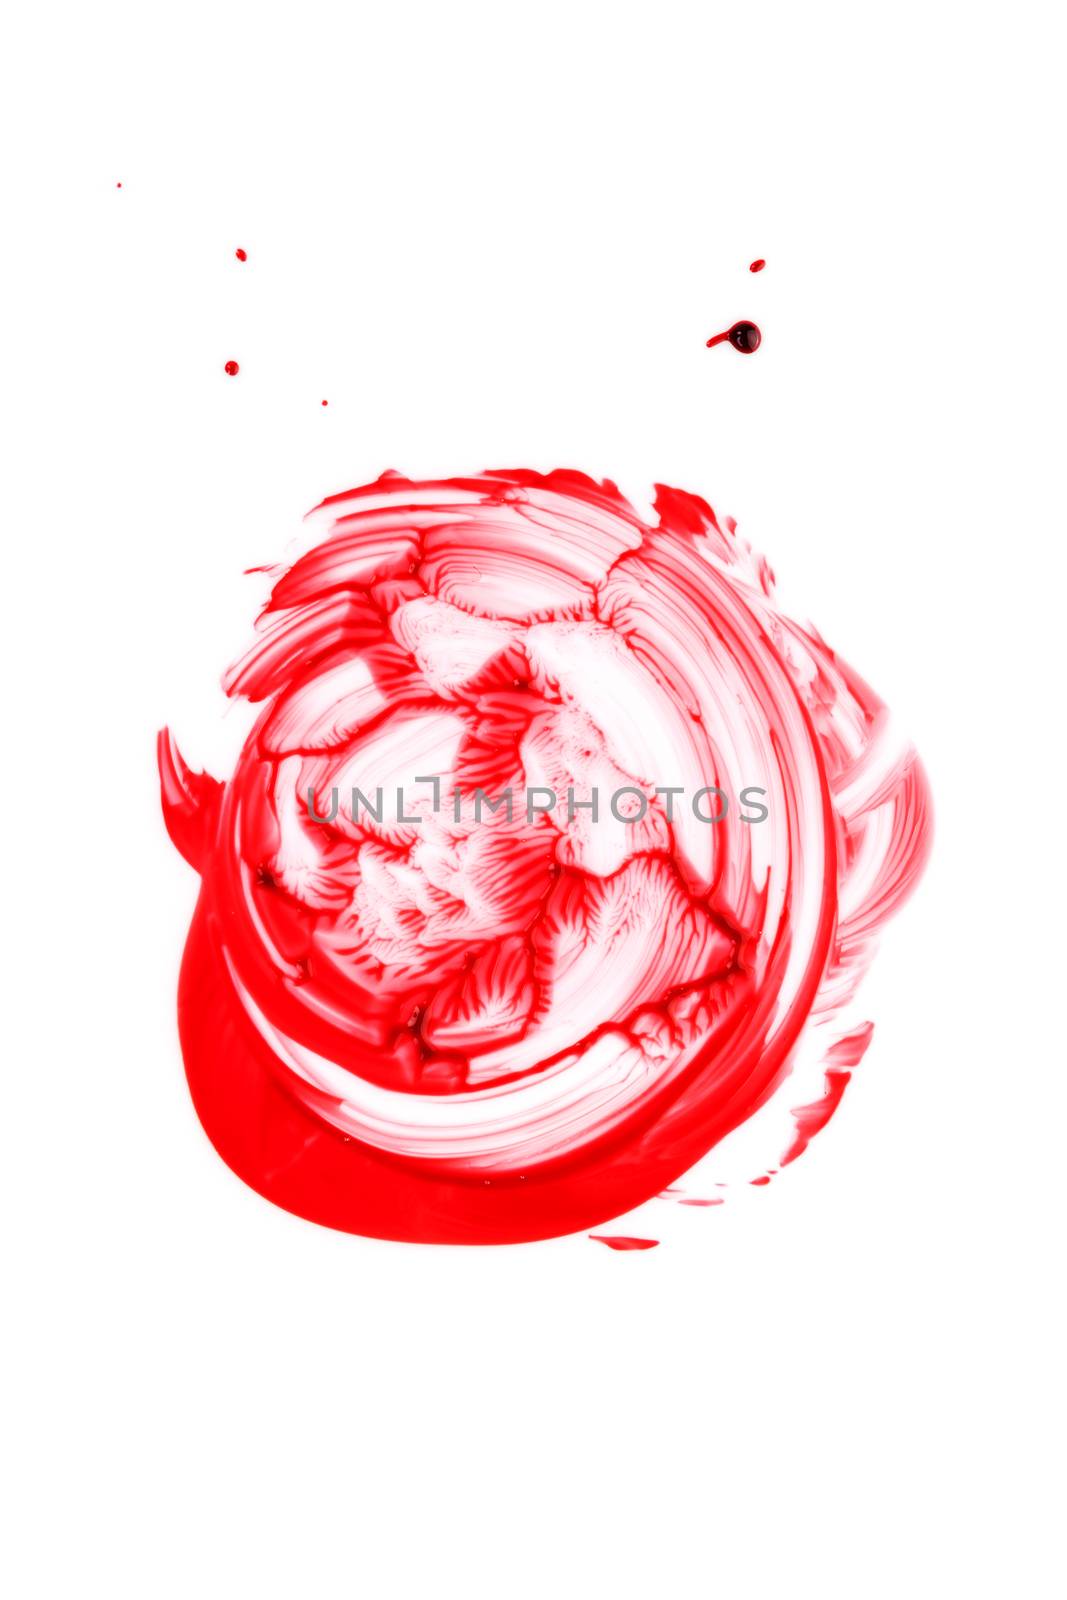 Blood splatter isolated on white background, top view.